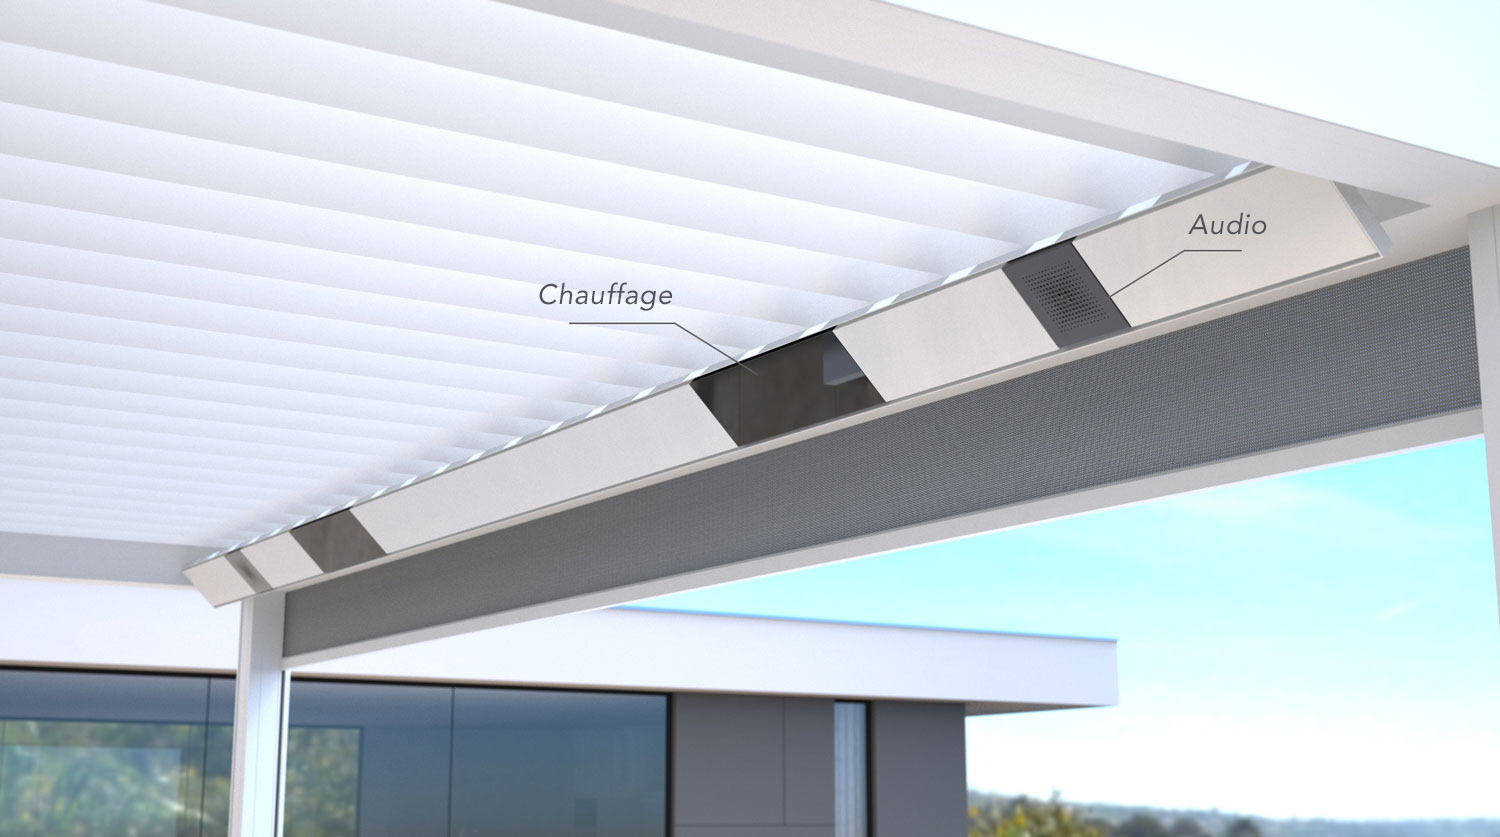 Lighting and heating integrated into the design | PATRICK ST-ONGE PERGOLA